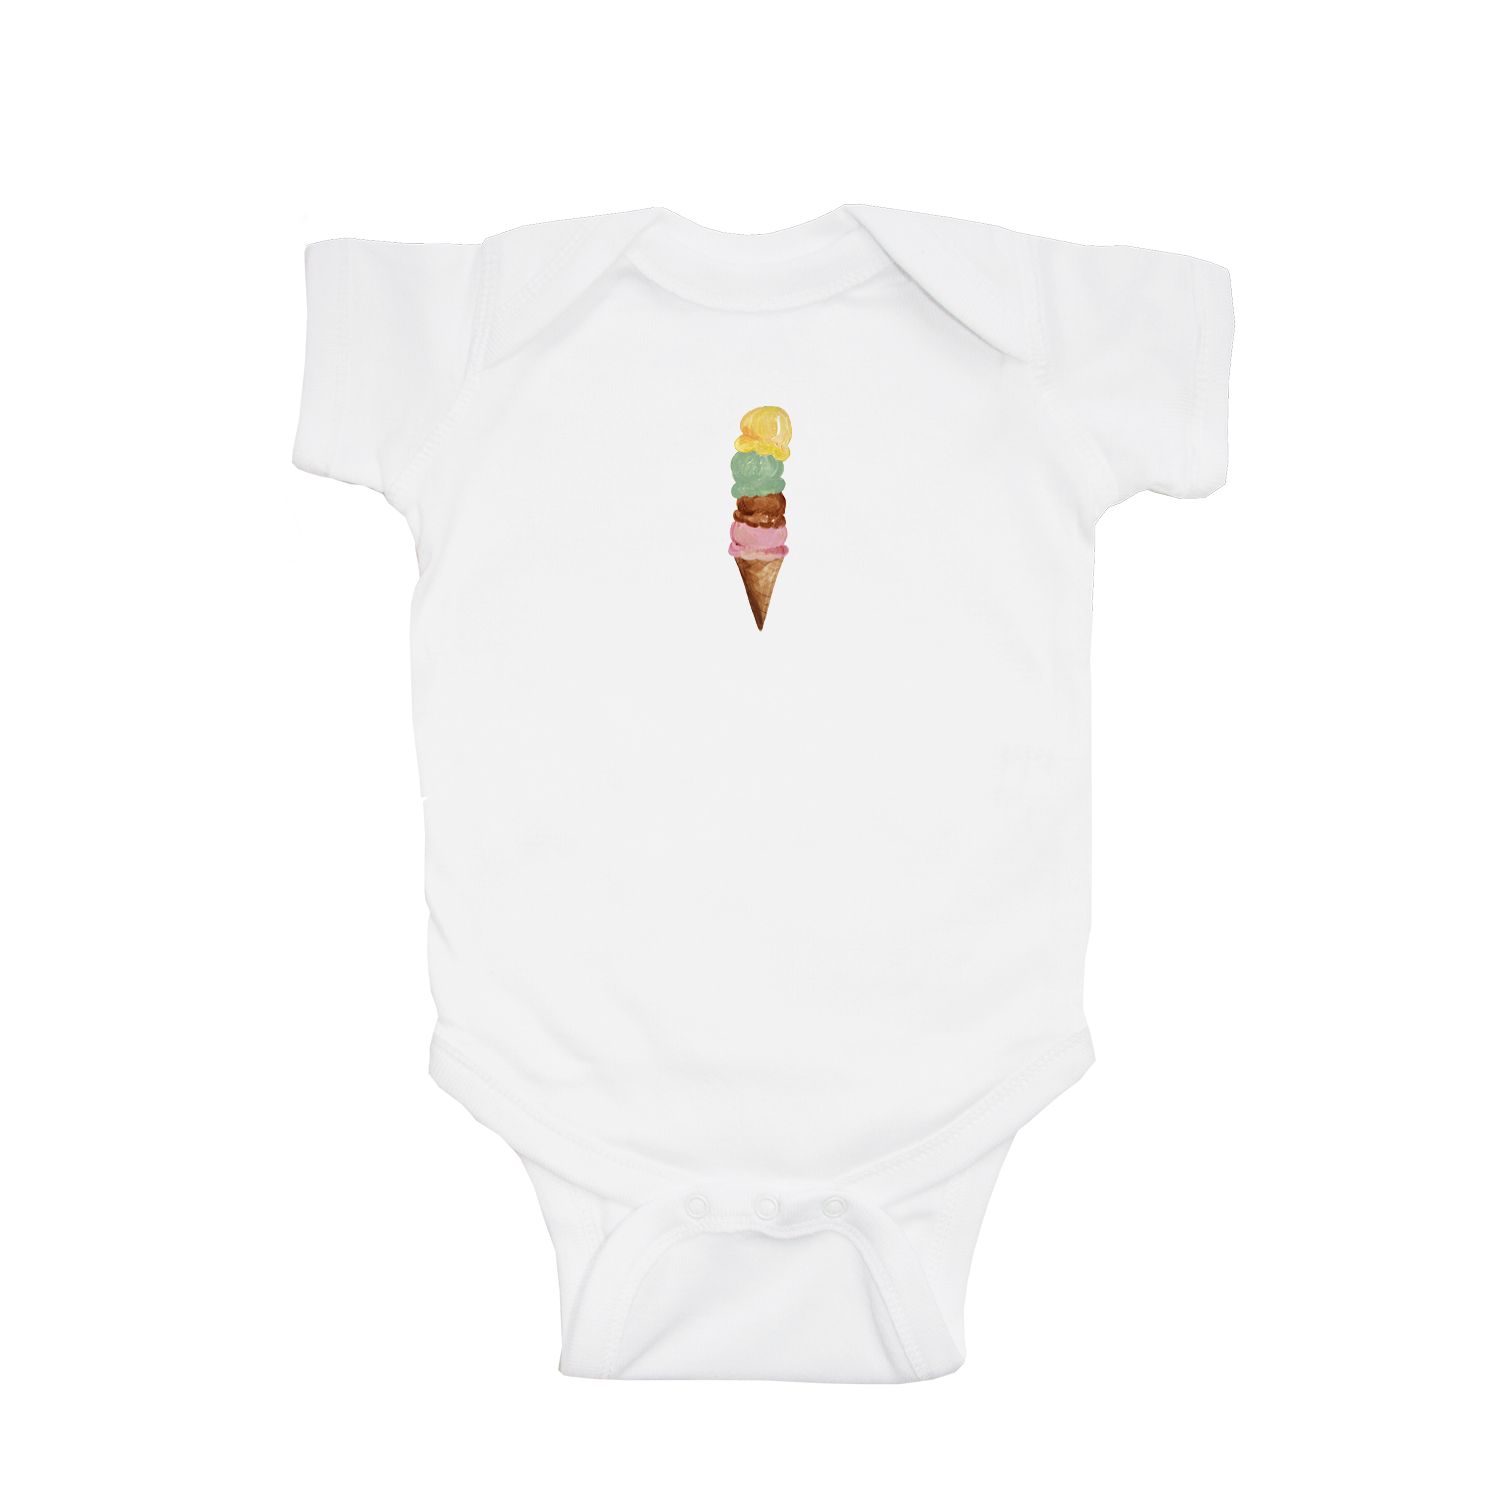 four scoop cone baby snap up short sleeve